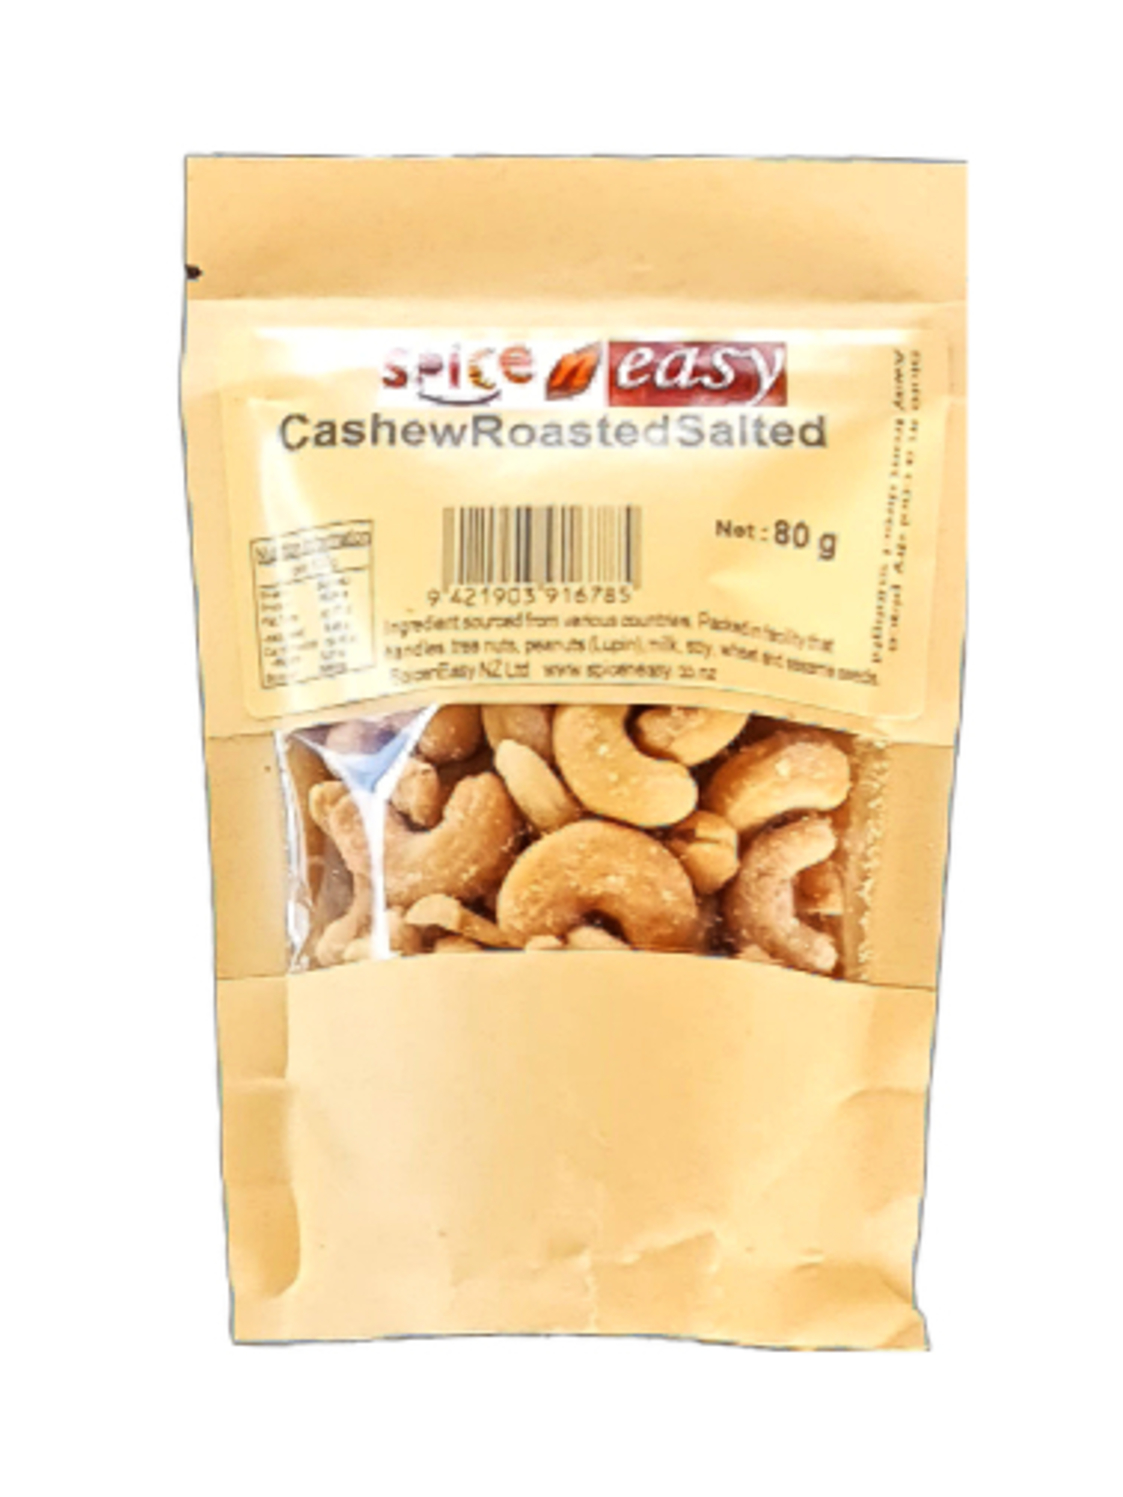 Cashew Roasted Salted 80g